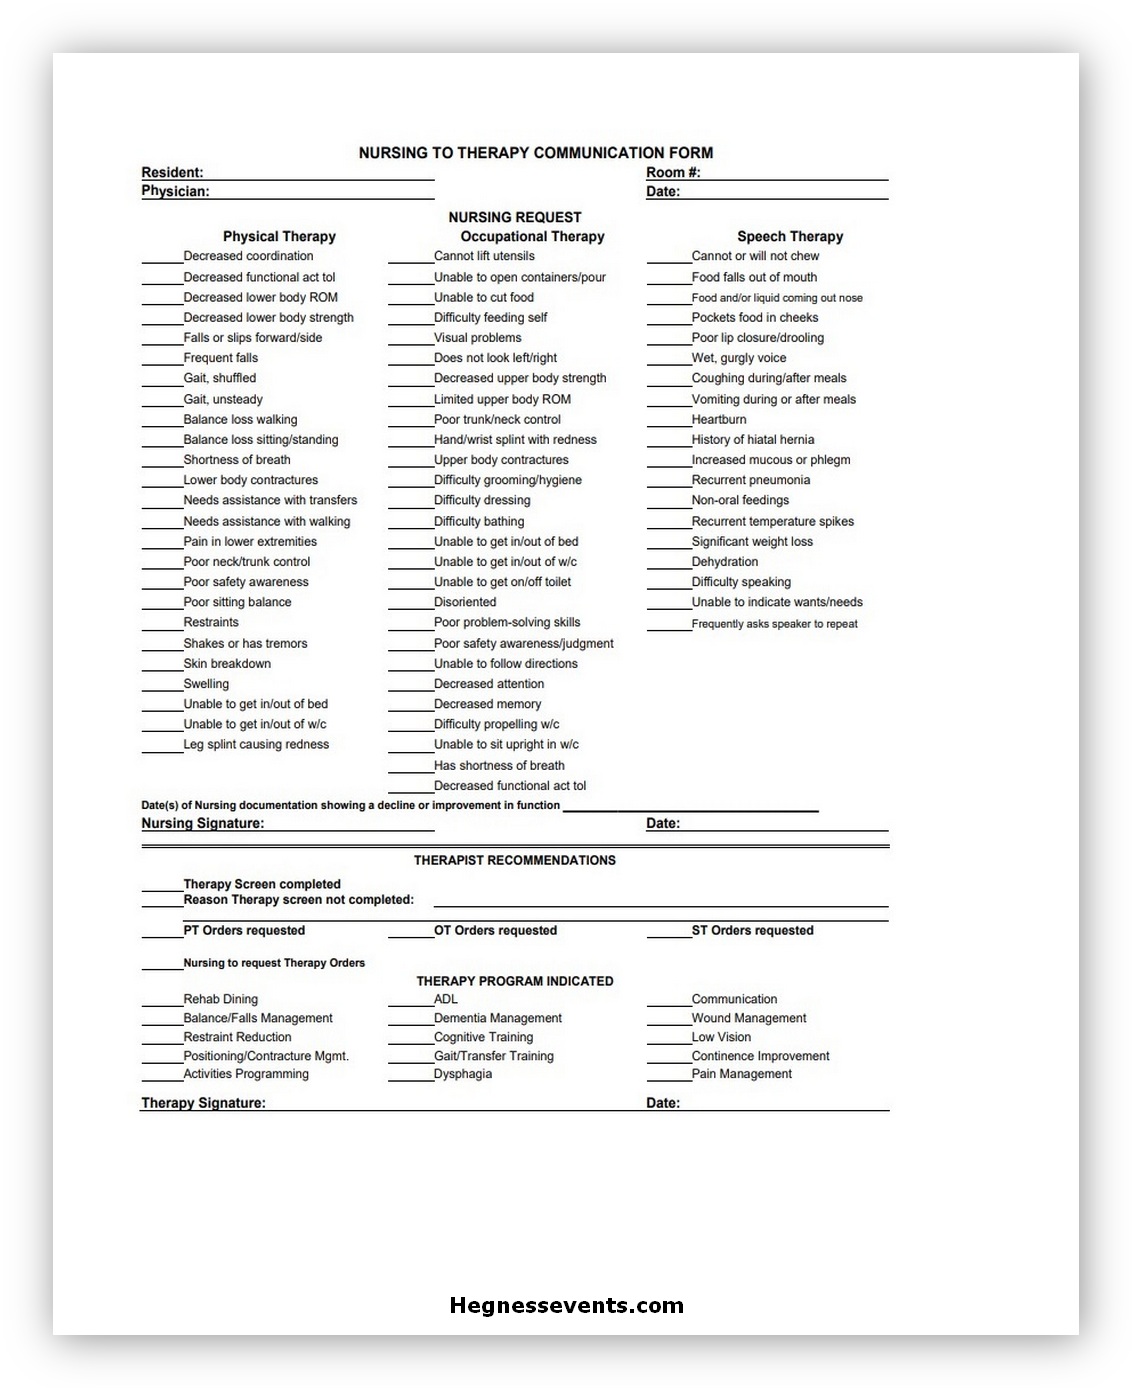 Therapy Communication Form